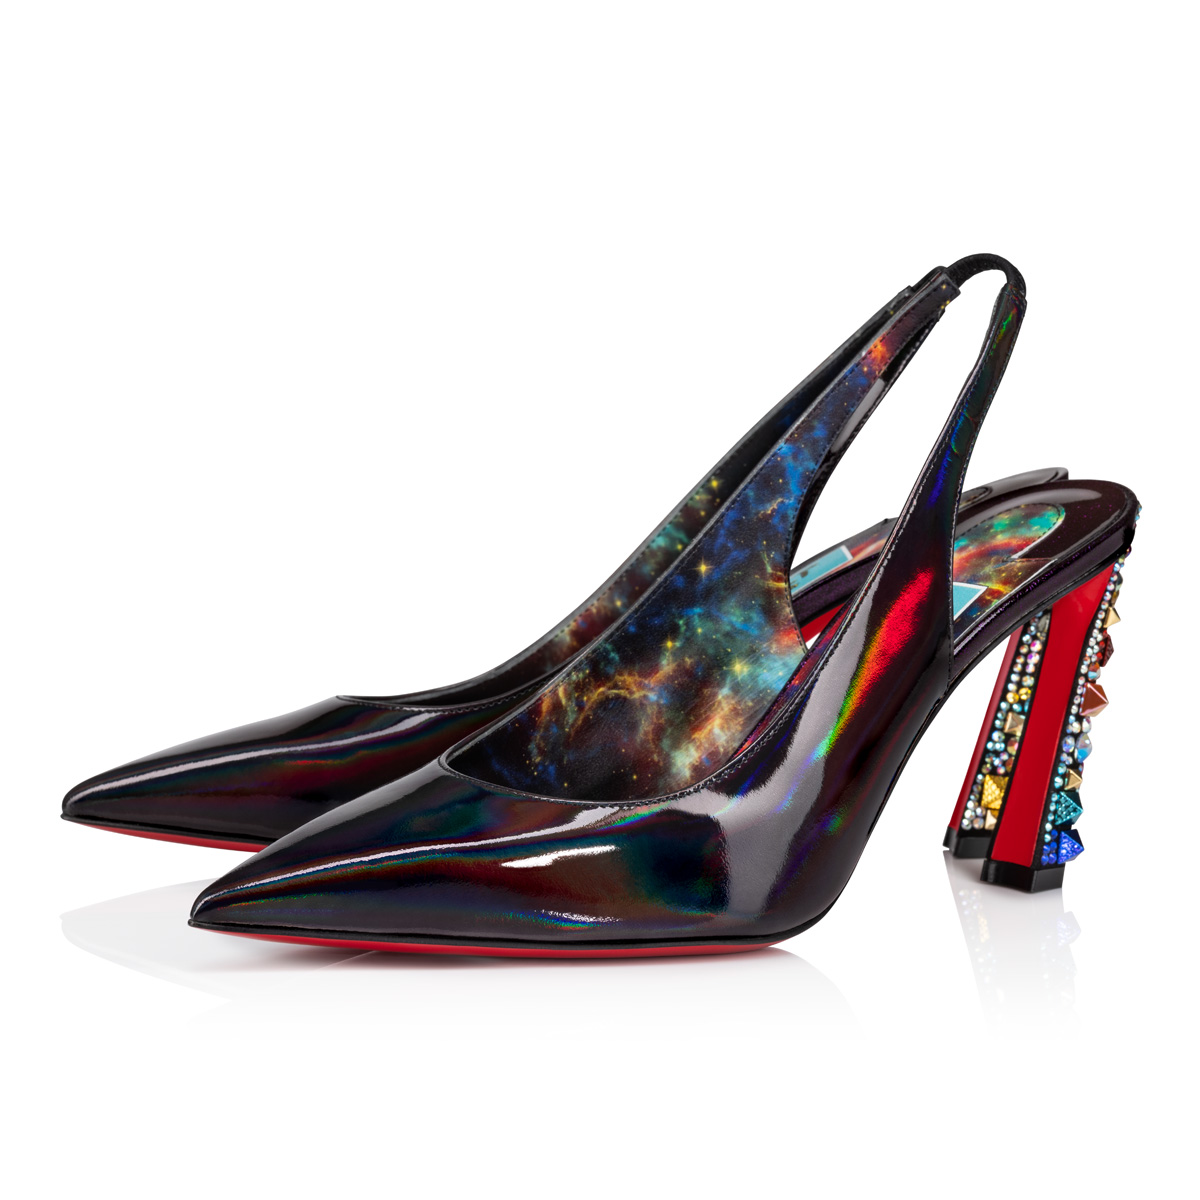 Christian Louboutin's Marvel Shoe Collection Brings Red Soles to Superheros  - Nerdist